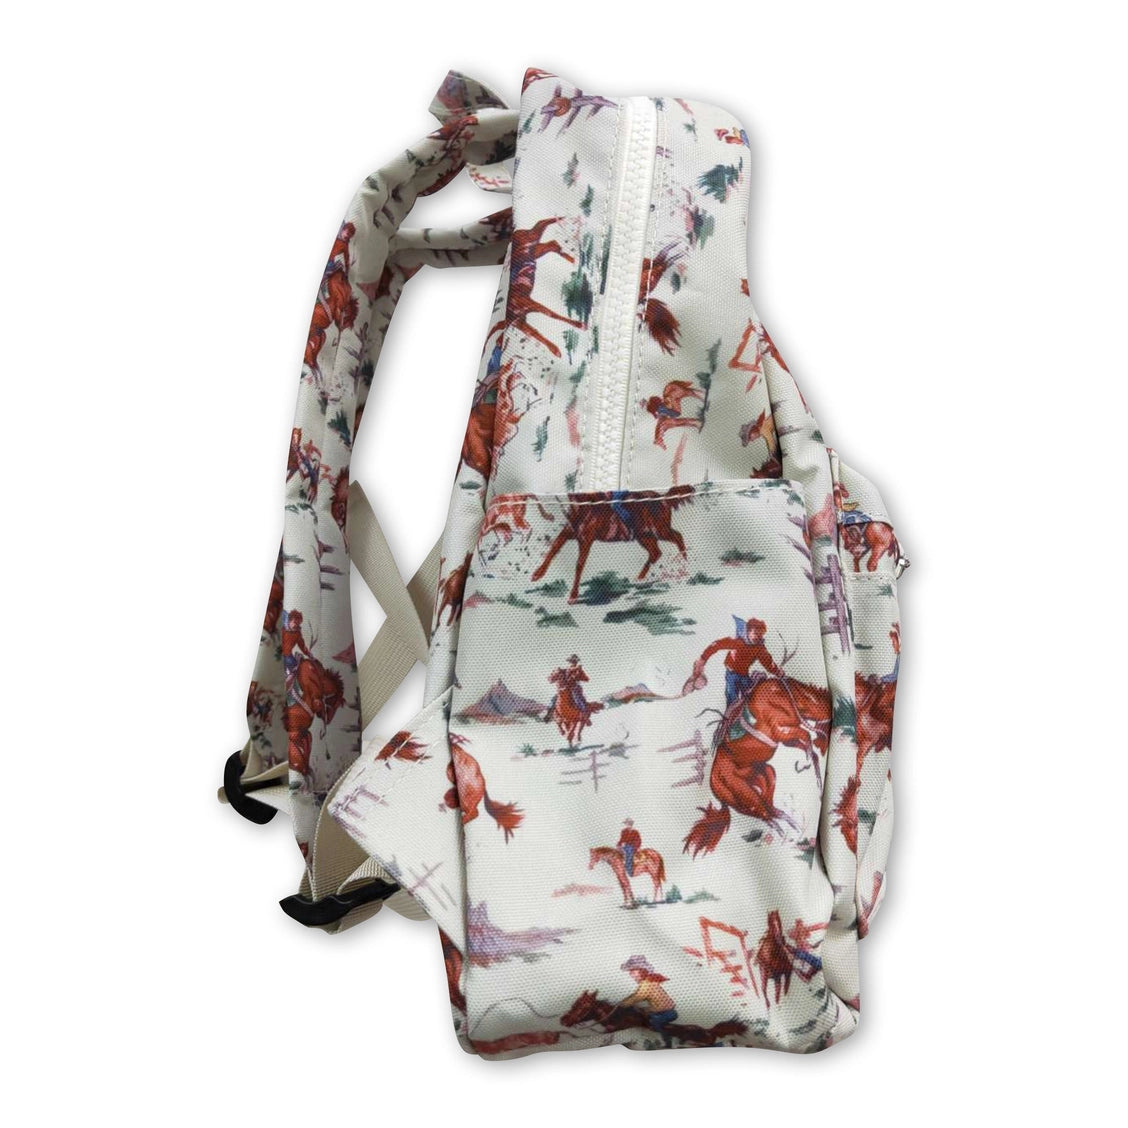 rodeo kids backpack